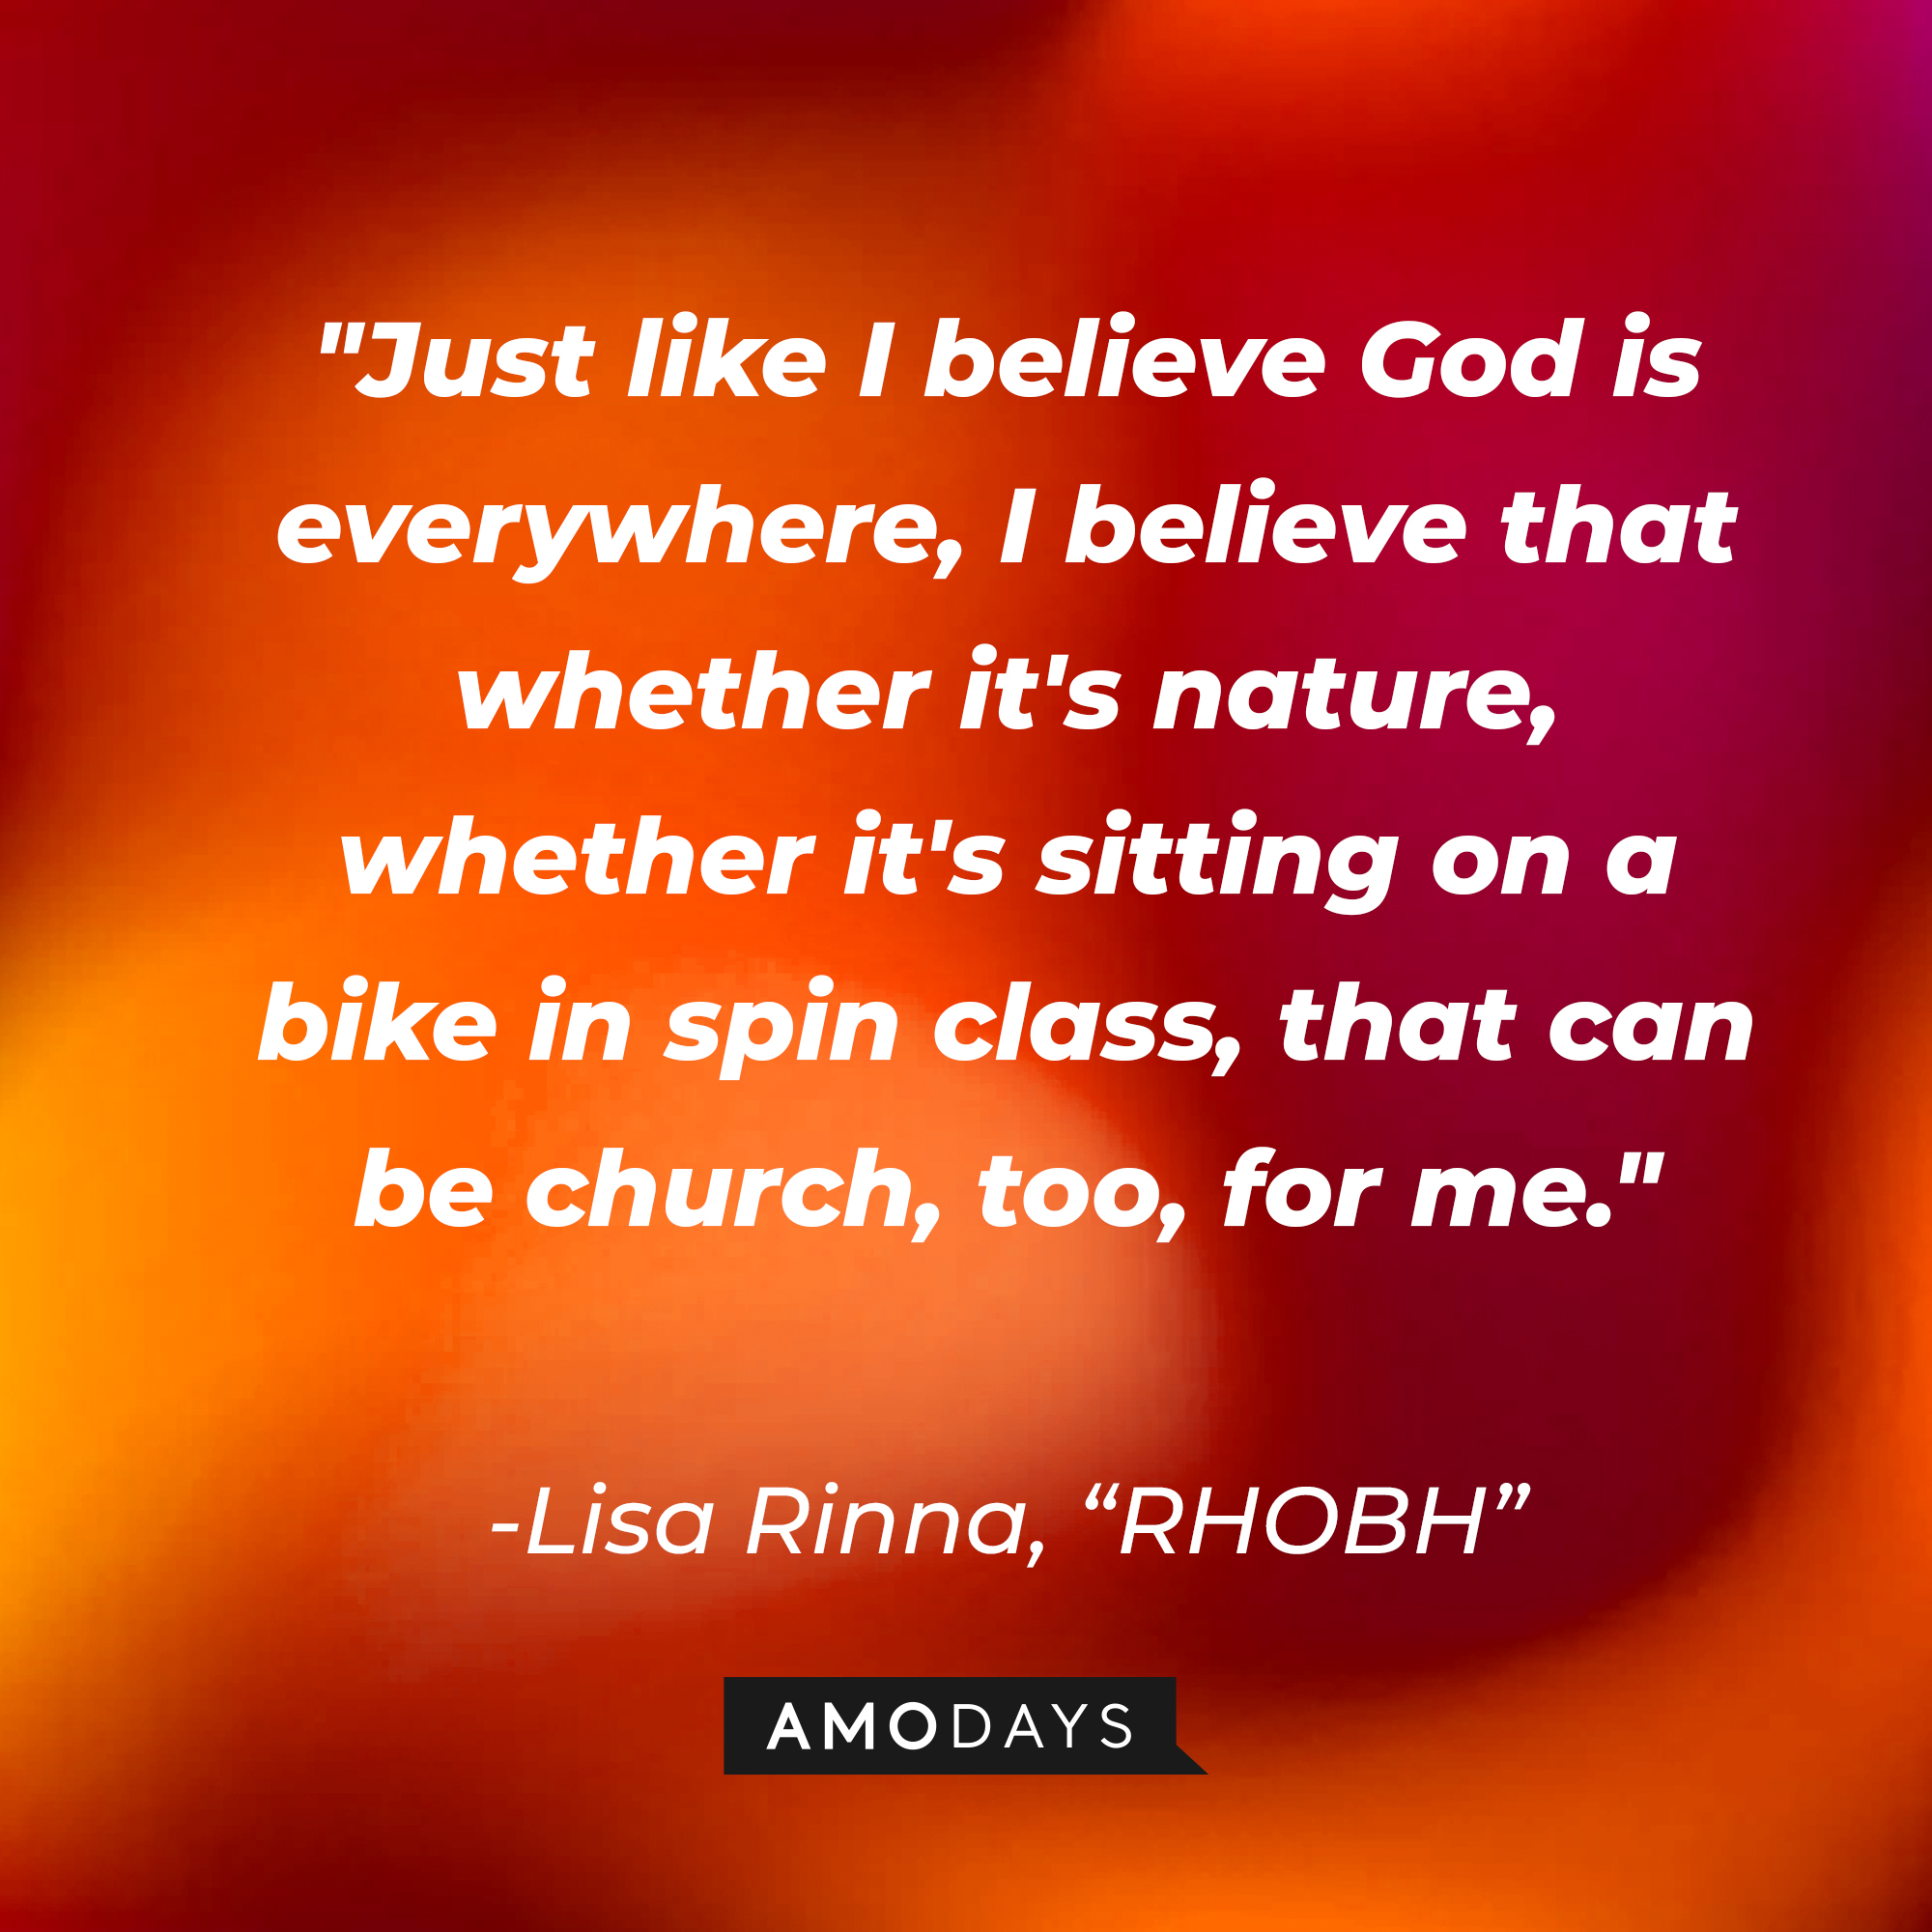 Lisa Rinna's quote from "The Real Housewives of Beverly Hills:" "Just like I believe God is everywhere, I believe that whether it's nature, whether it's sitting on a bike in spin class, that can be church, too, for me." | Source: AmoDays